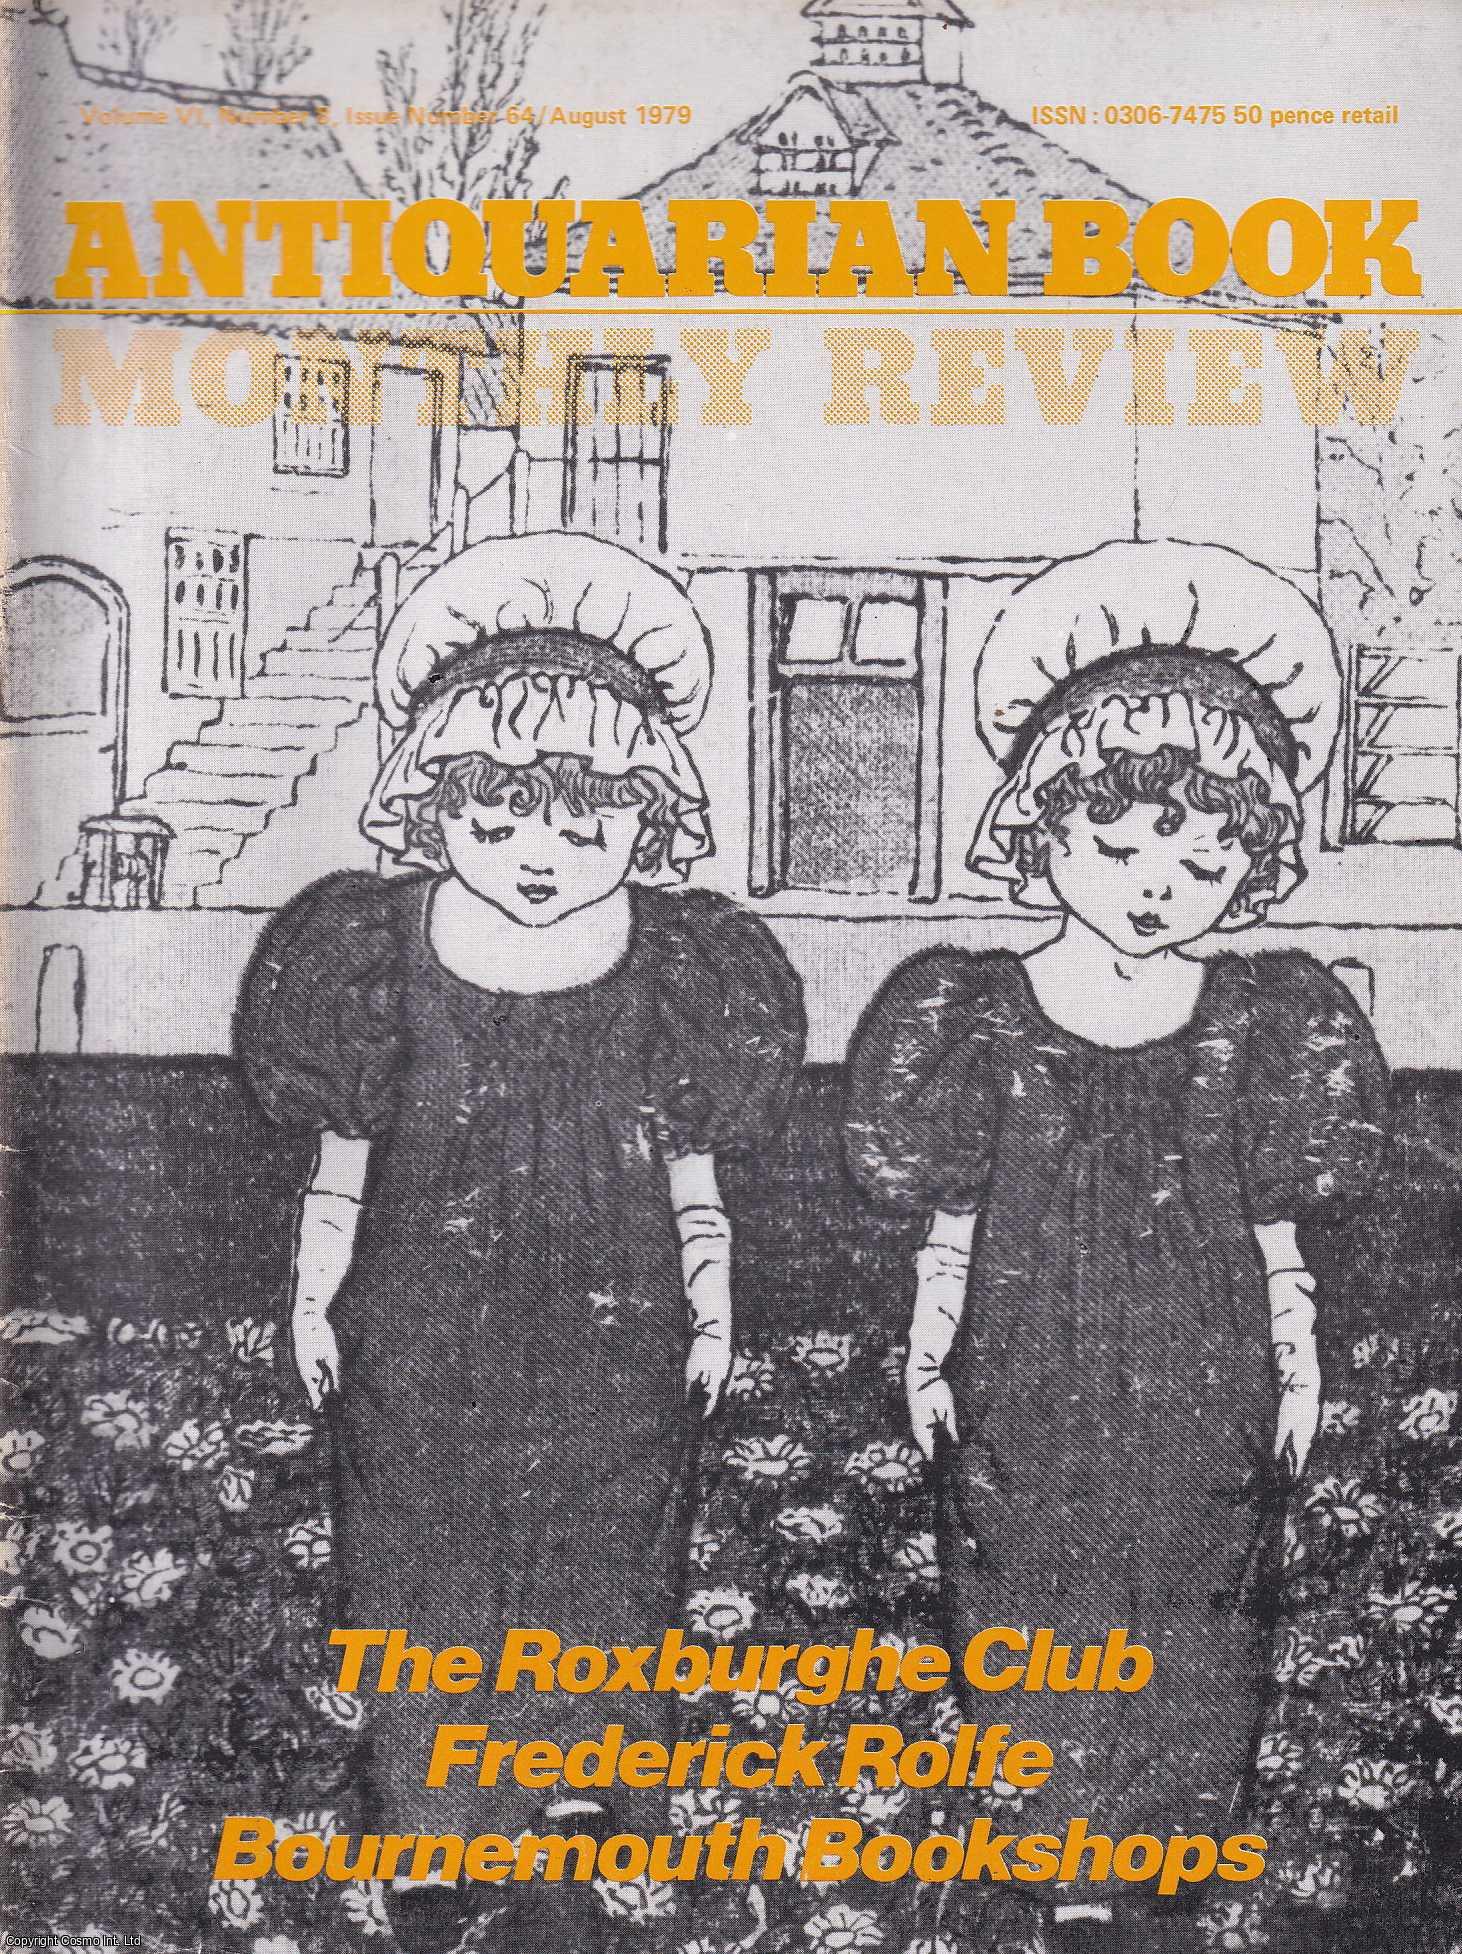 John Turner - The Roxburghe Club. An original article contained in a complete monthly issue of the Antiquarian Book Monthly Review, 1979.